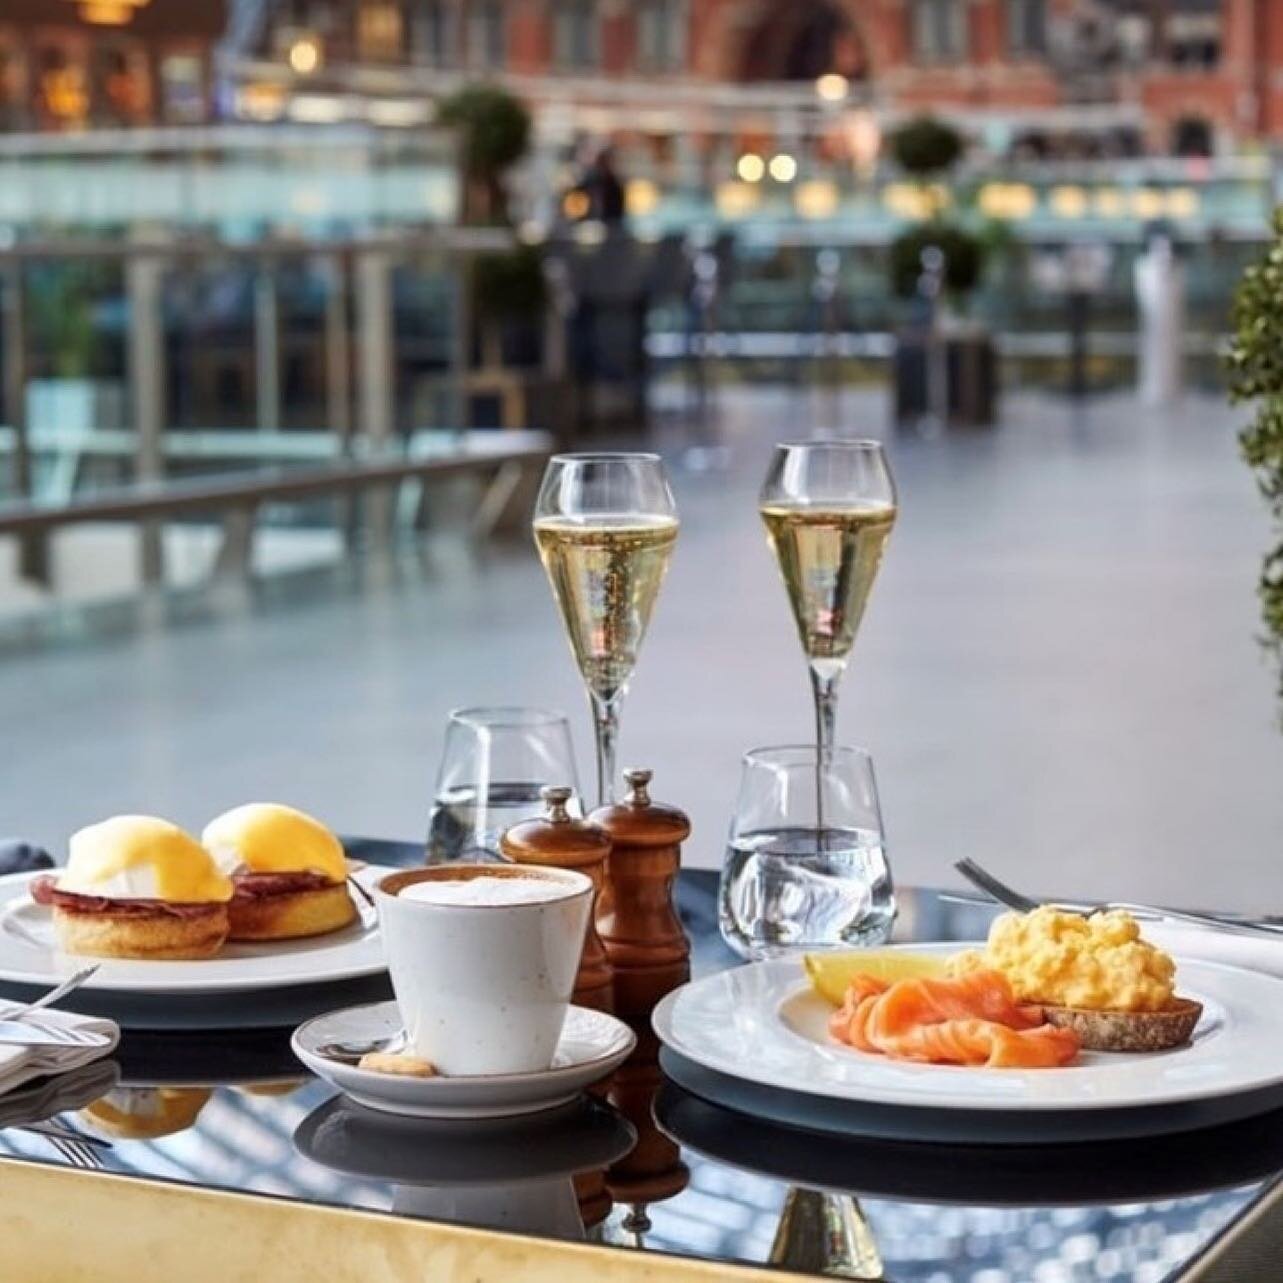 &bull; @stpancrasinternational &bull;What better way to start your week than with mouth-watering food and a glass of #searcystpancras fizz on the Champagne Terrace &bull; #cheilagibbs #cheilagibbslifestyle #cheilagibbswayoflife  #cheilagibbsrestauran